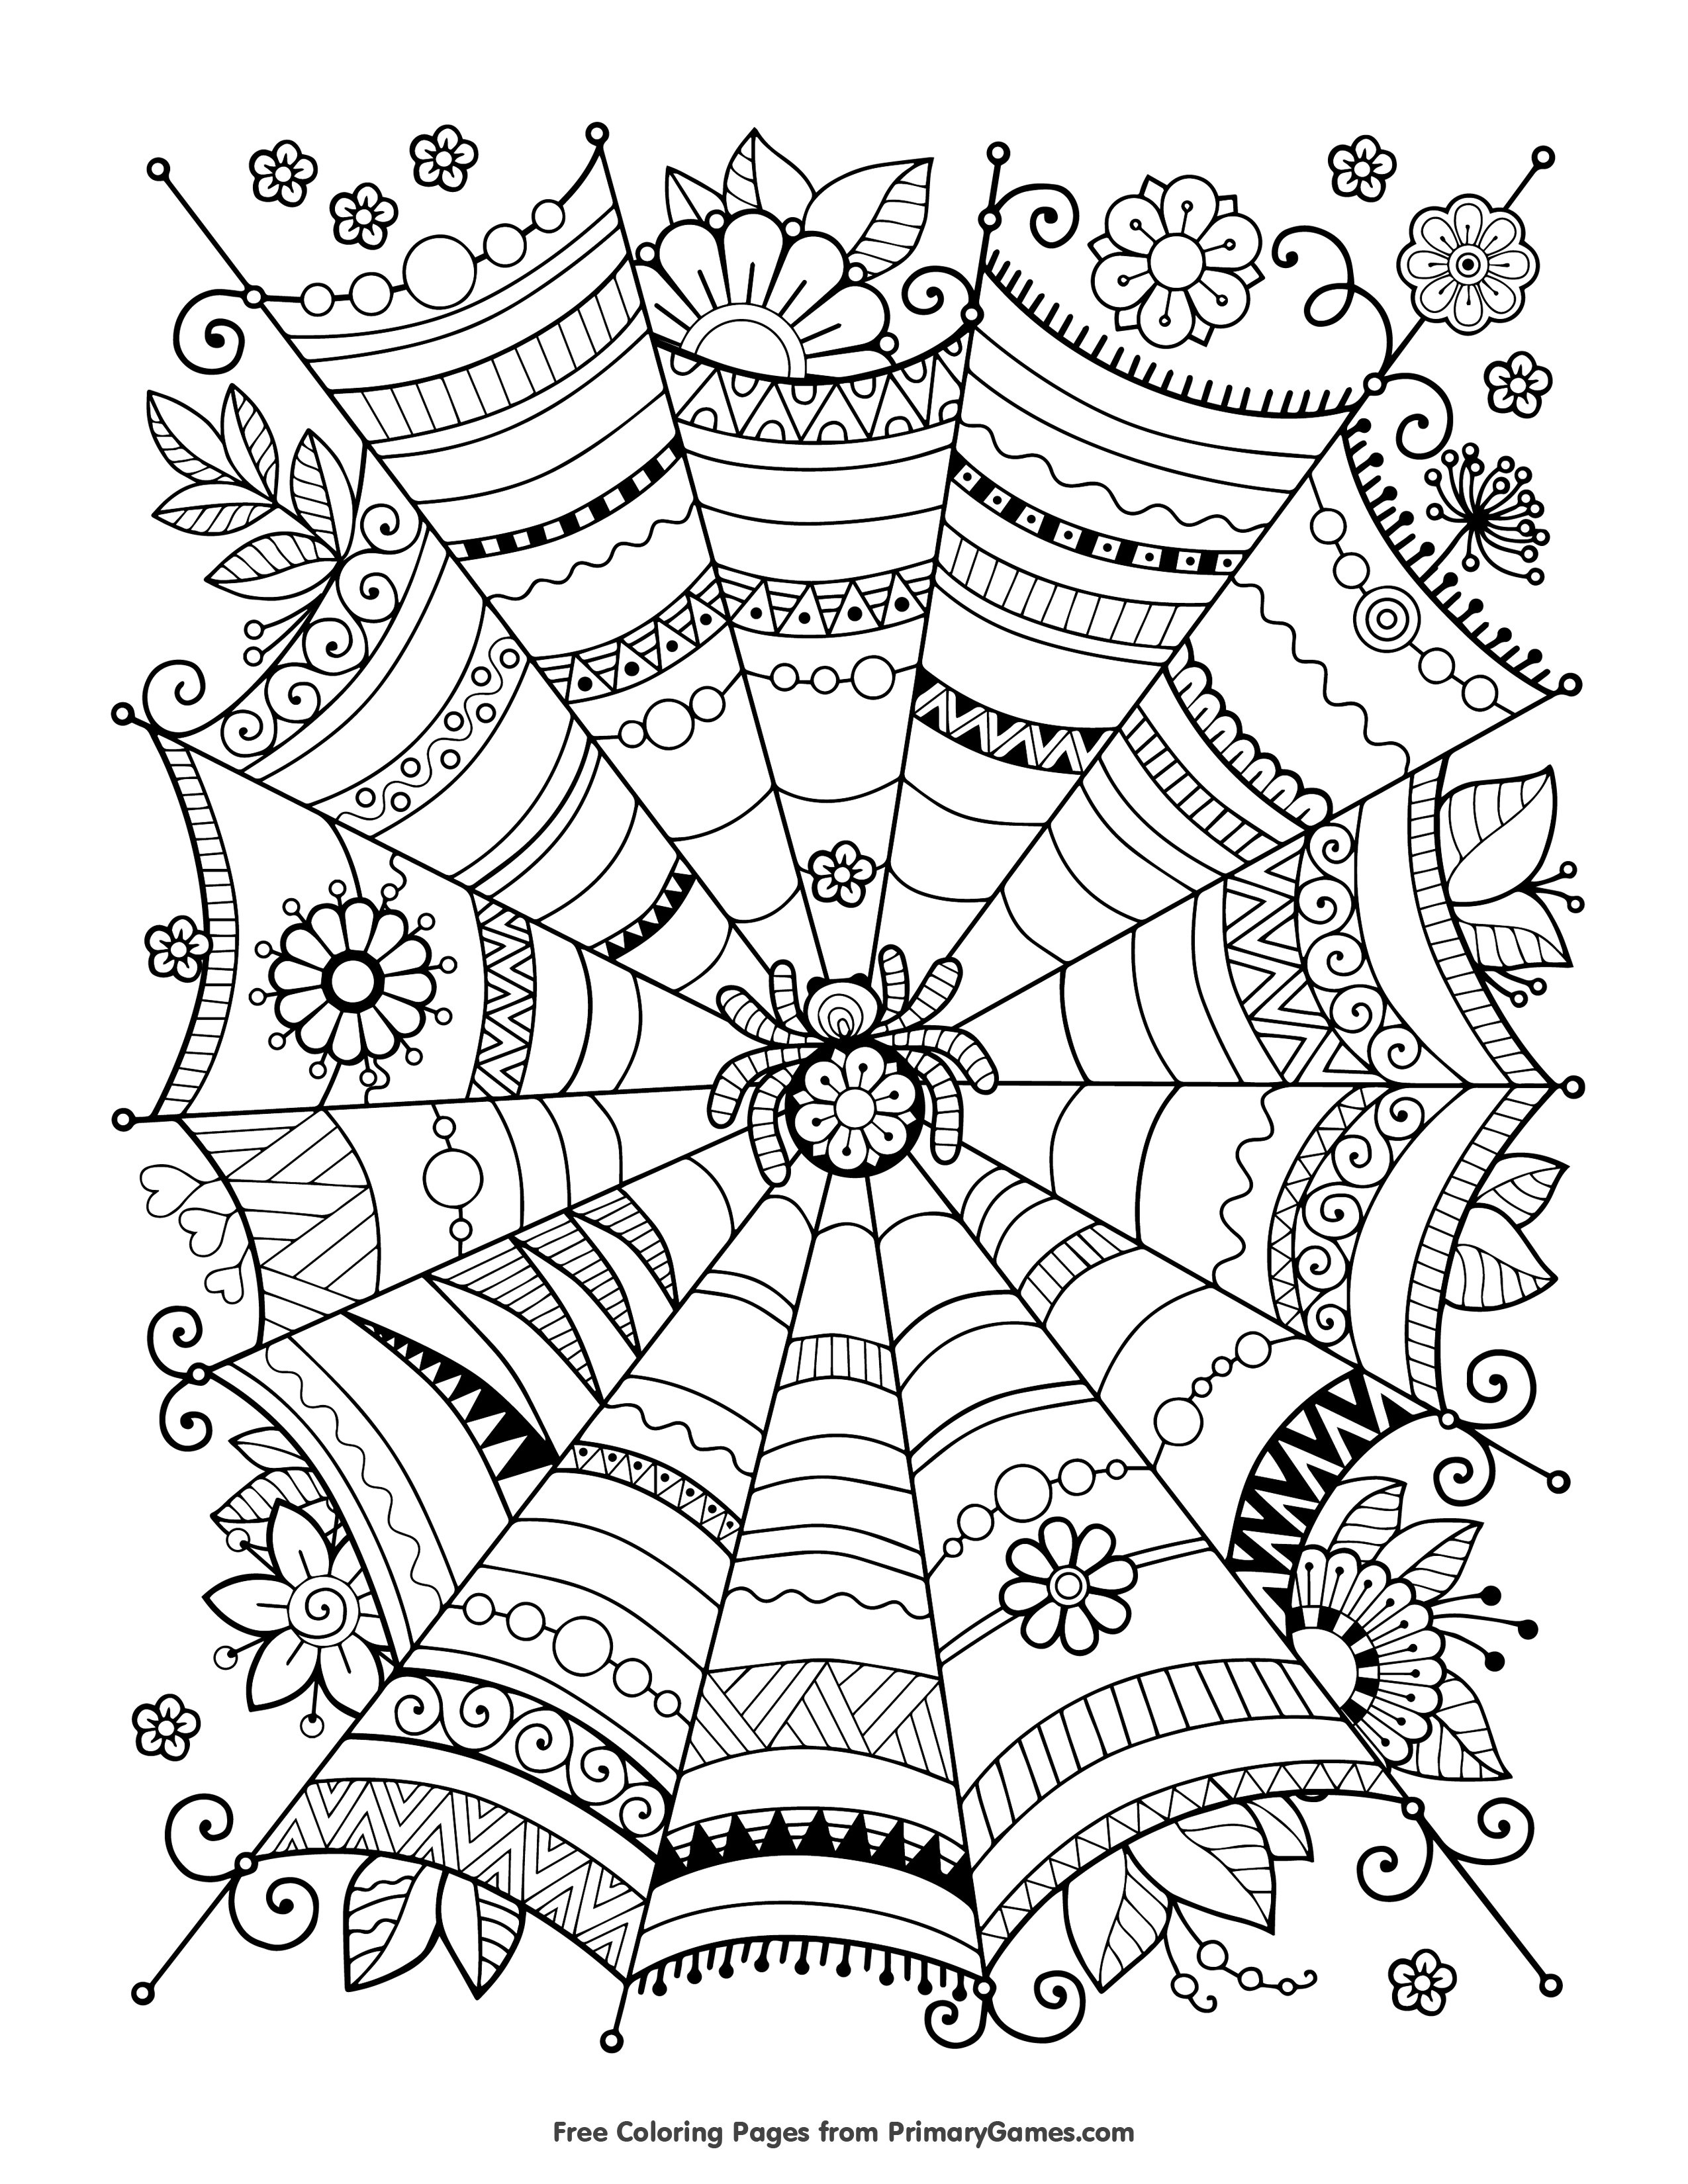 Coloring Pages : Zentangle Spider Web Coloring Page Pages Free - Free Printable Zen Coloring Pages